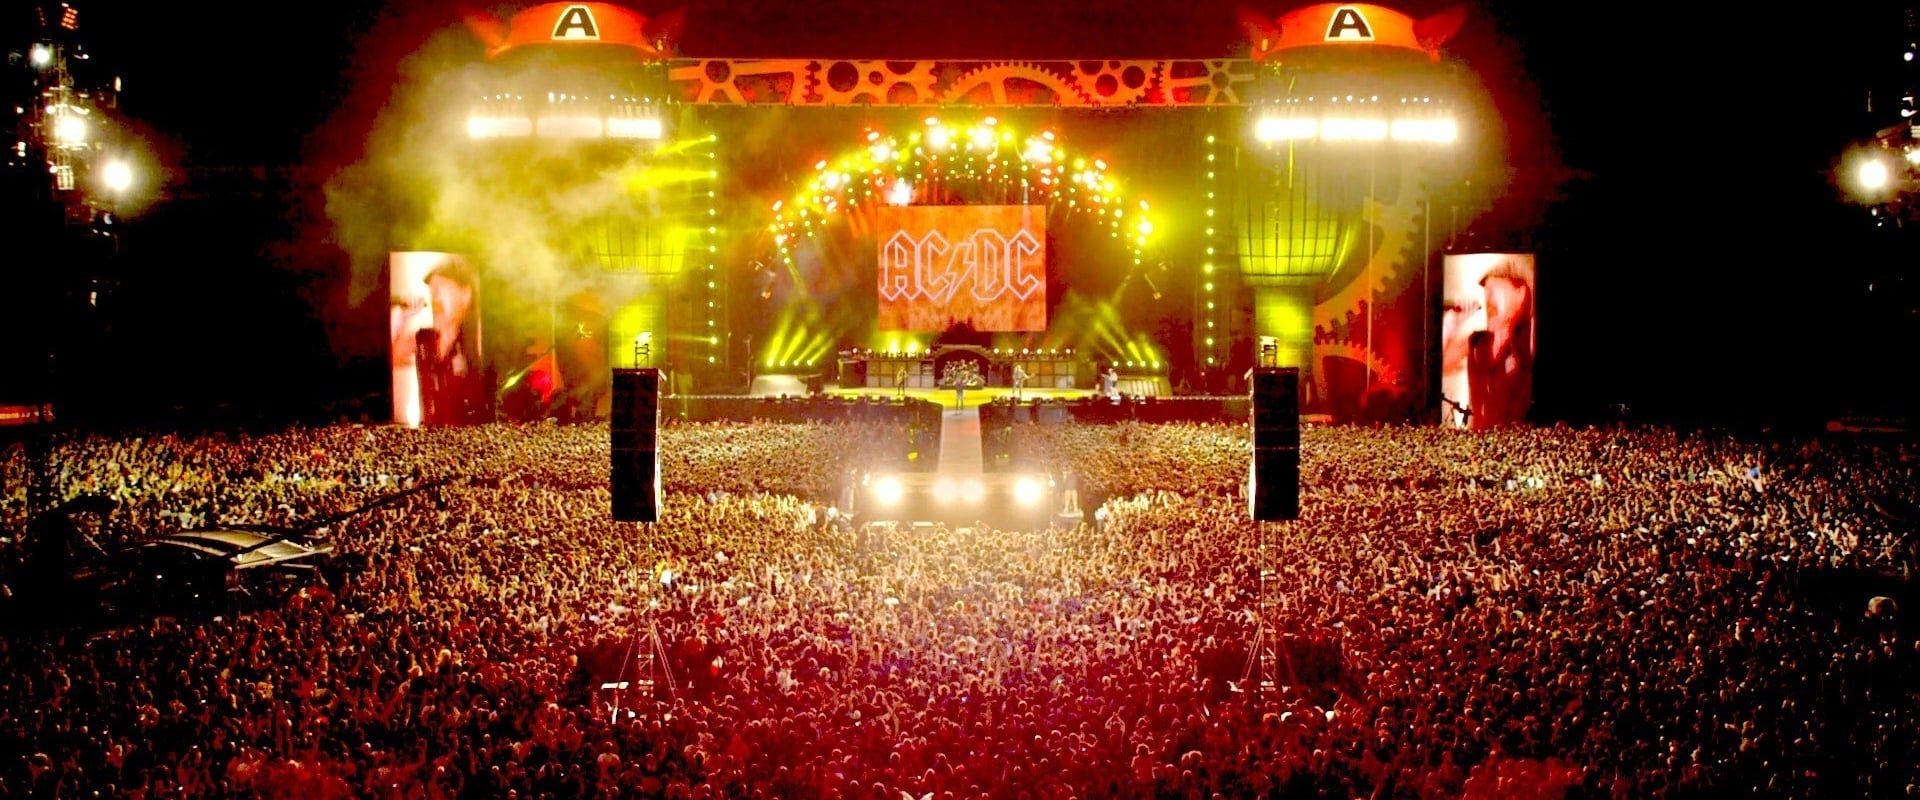 ACDC - Live At River Plate